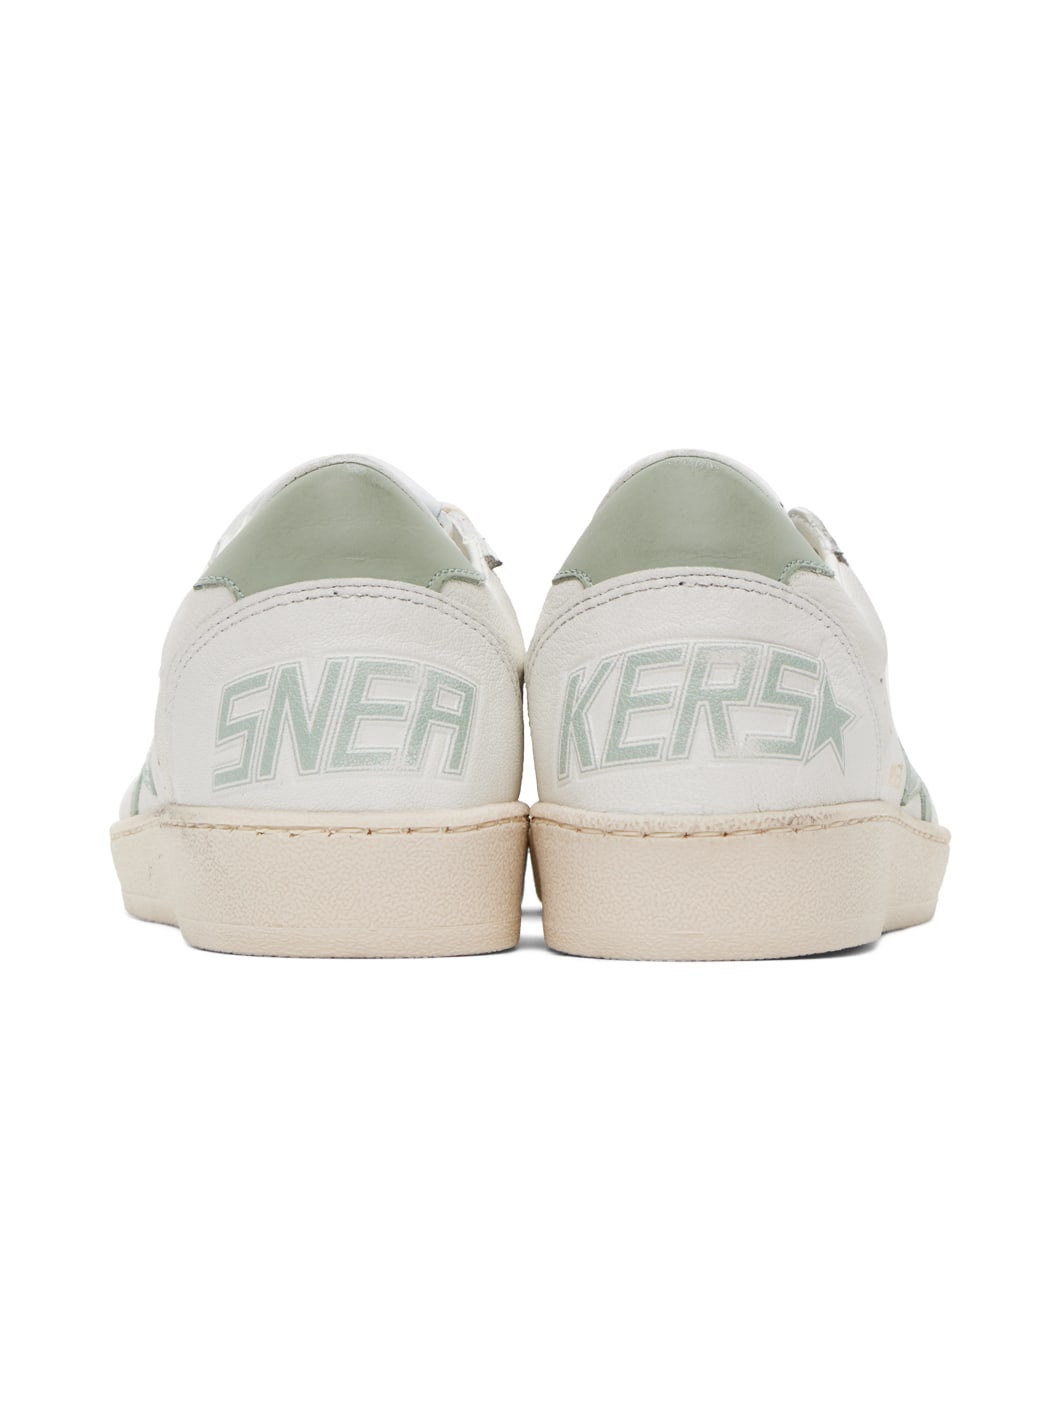 SSENSE Exclusive White & Green Ball Star Sneakers - 2